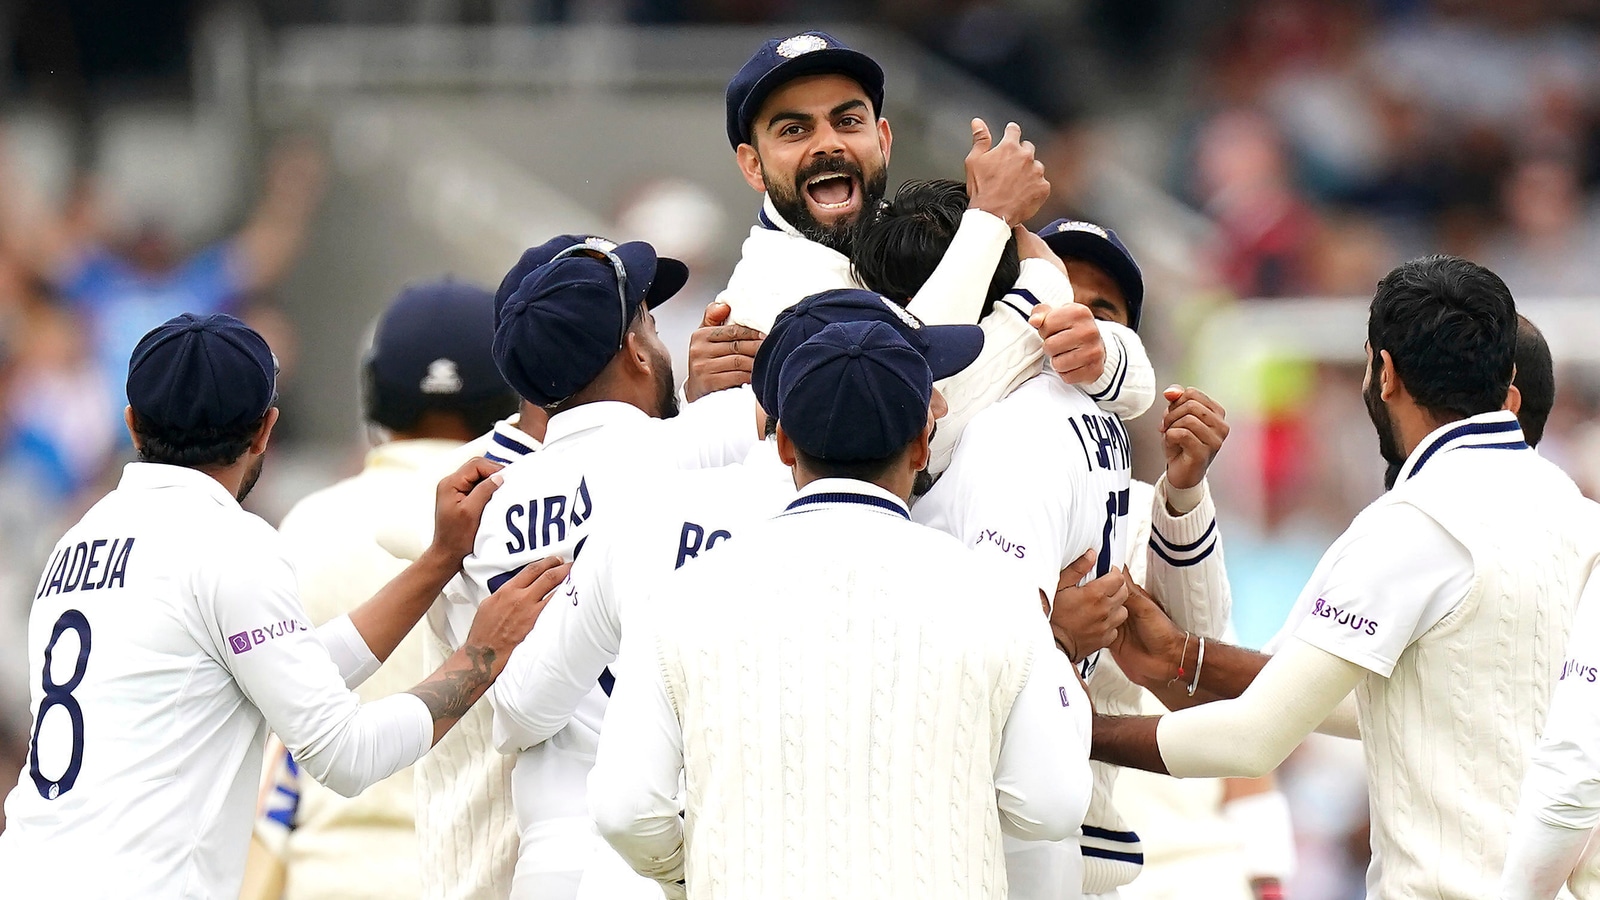 India vs England 3rd Test Live Streaming When and where to watch IND vs ENG 3rd Test Live on TV and Online Cricket